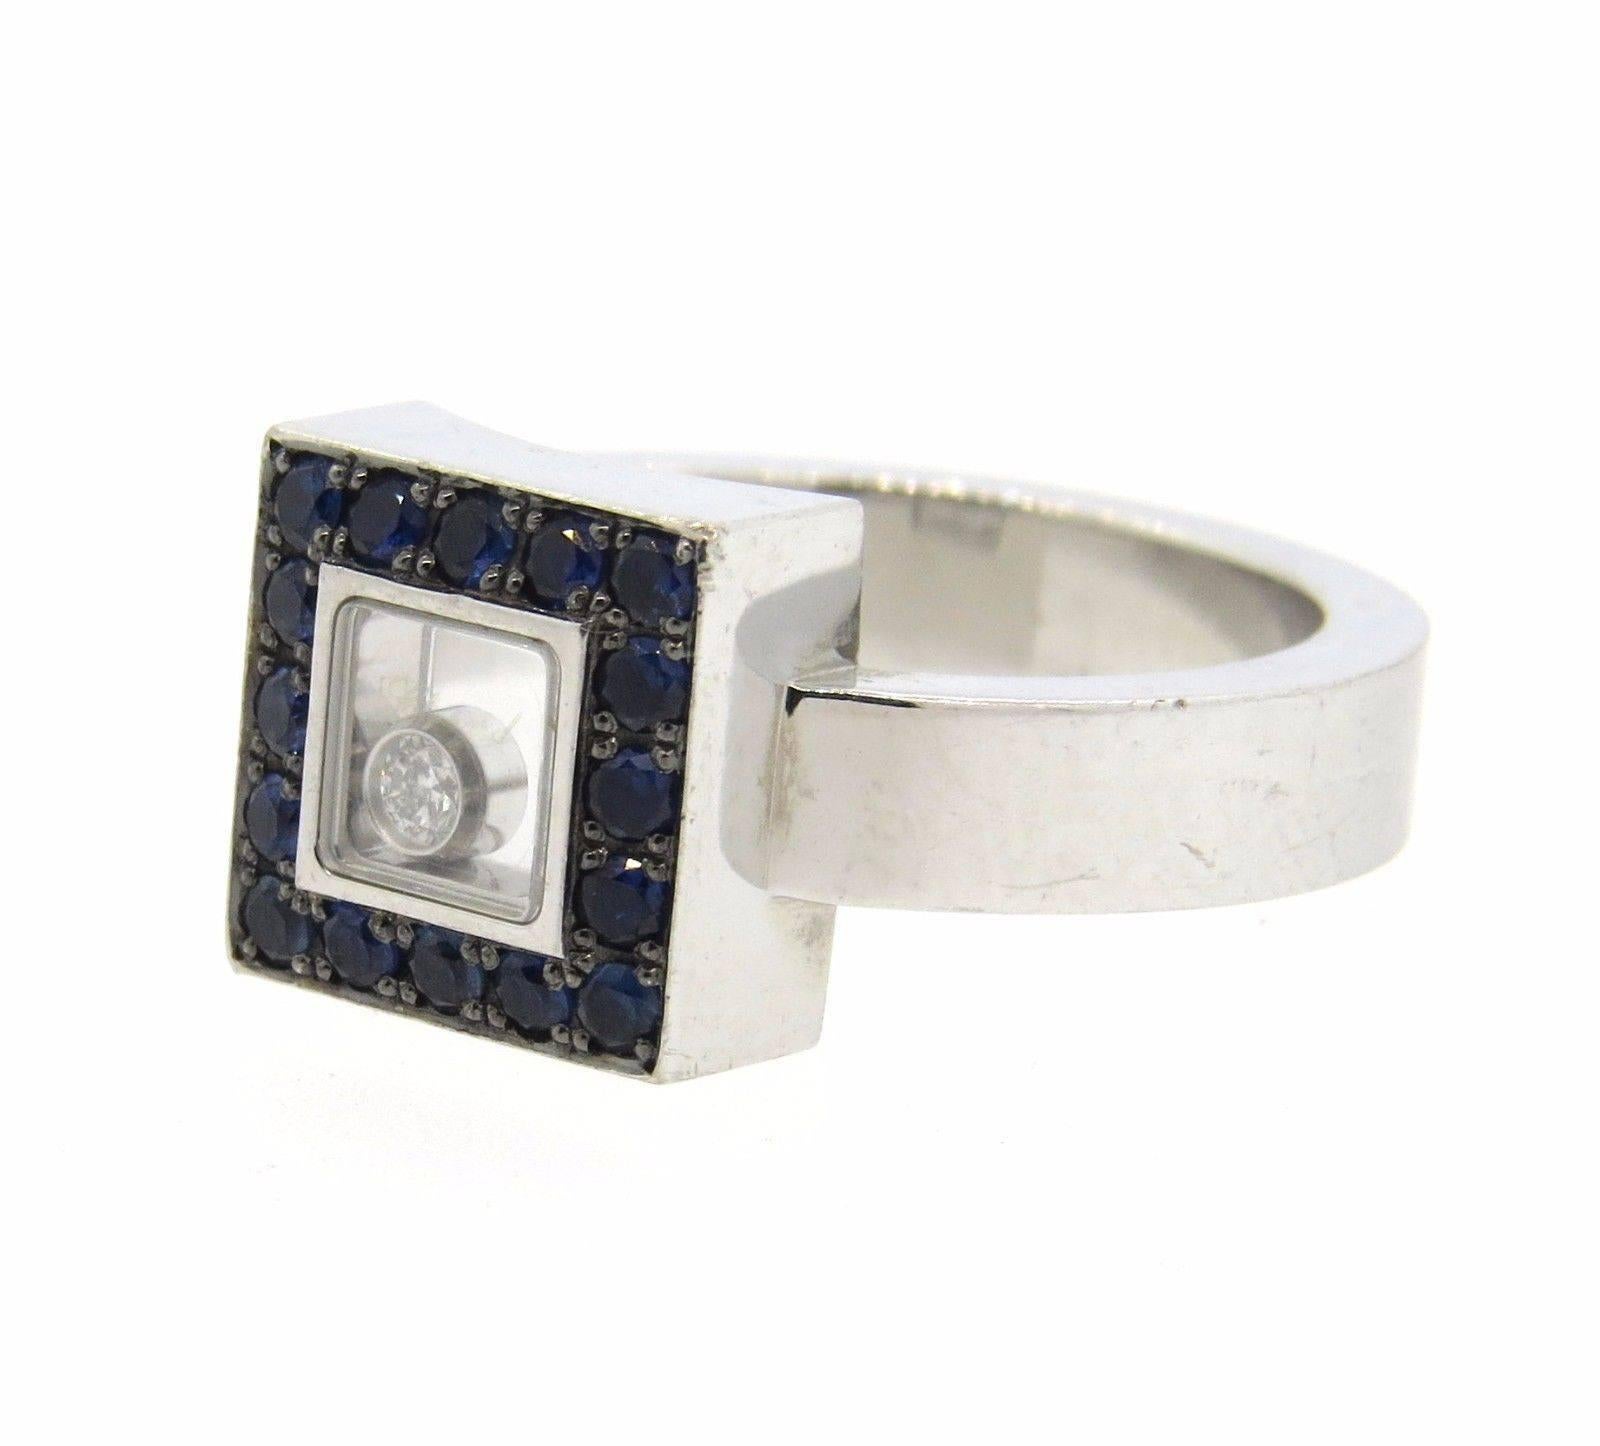 18k white gold square top ring, crafted by Chopard for Happy Diamonds collection, featuring blue sapphire top and signature floating diamond in the center. Ring size 6.75, measures 10mm at widest point. Marked: Chopard, 750, 2667731, 82/2896/3-20.